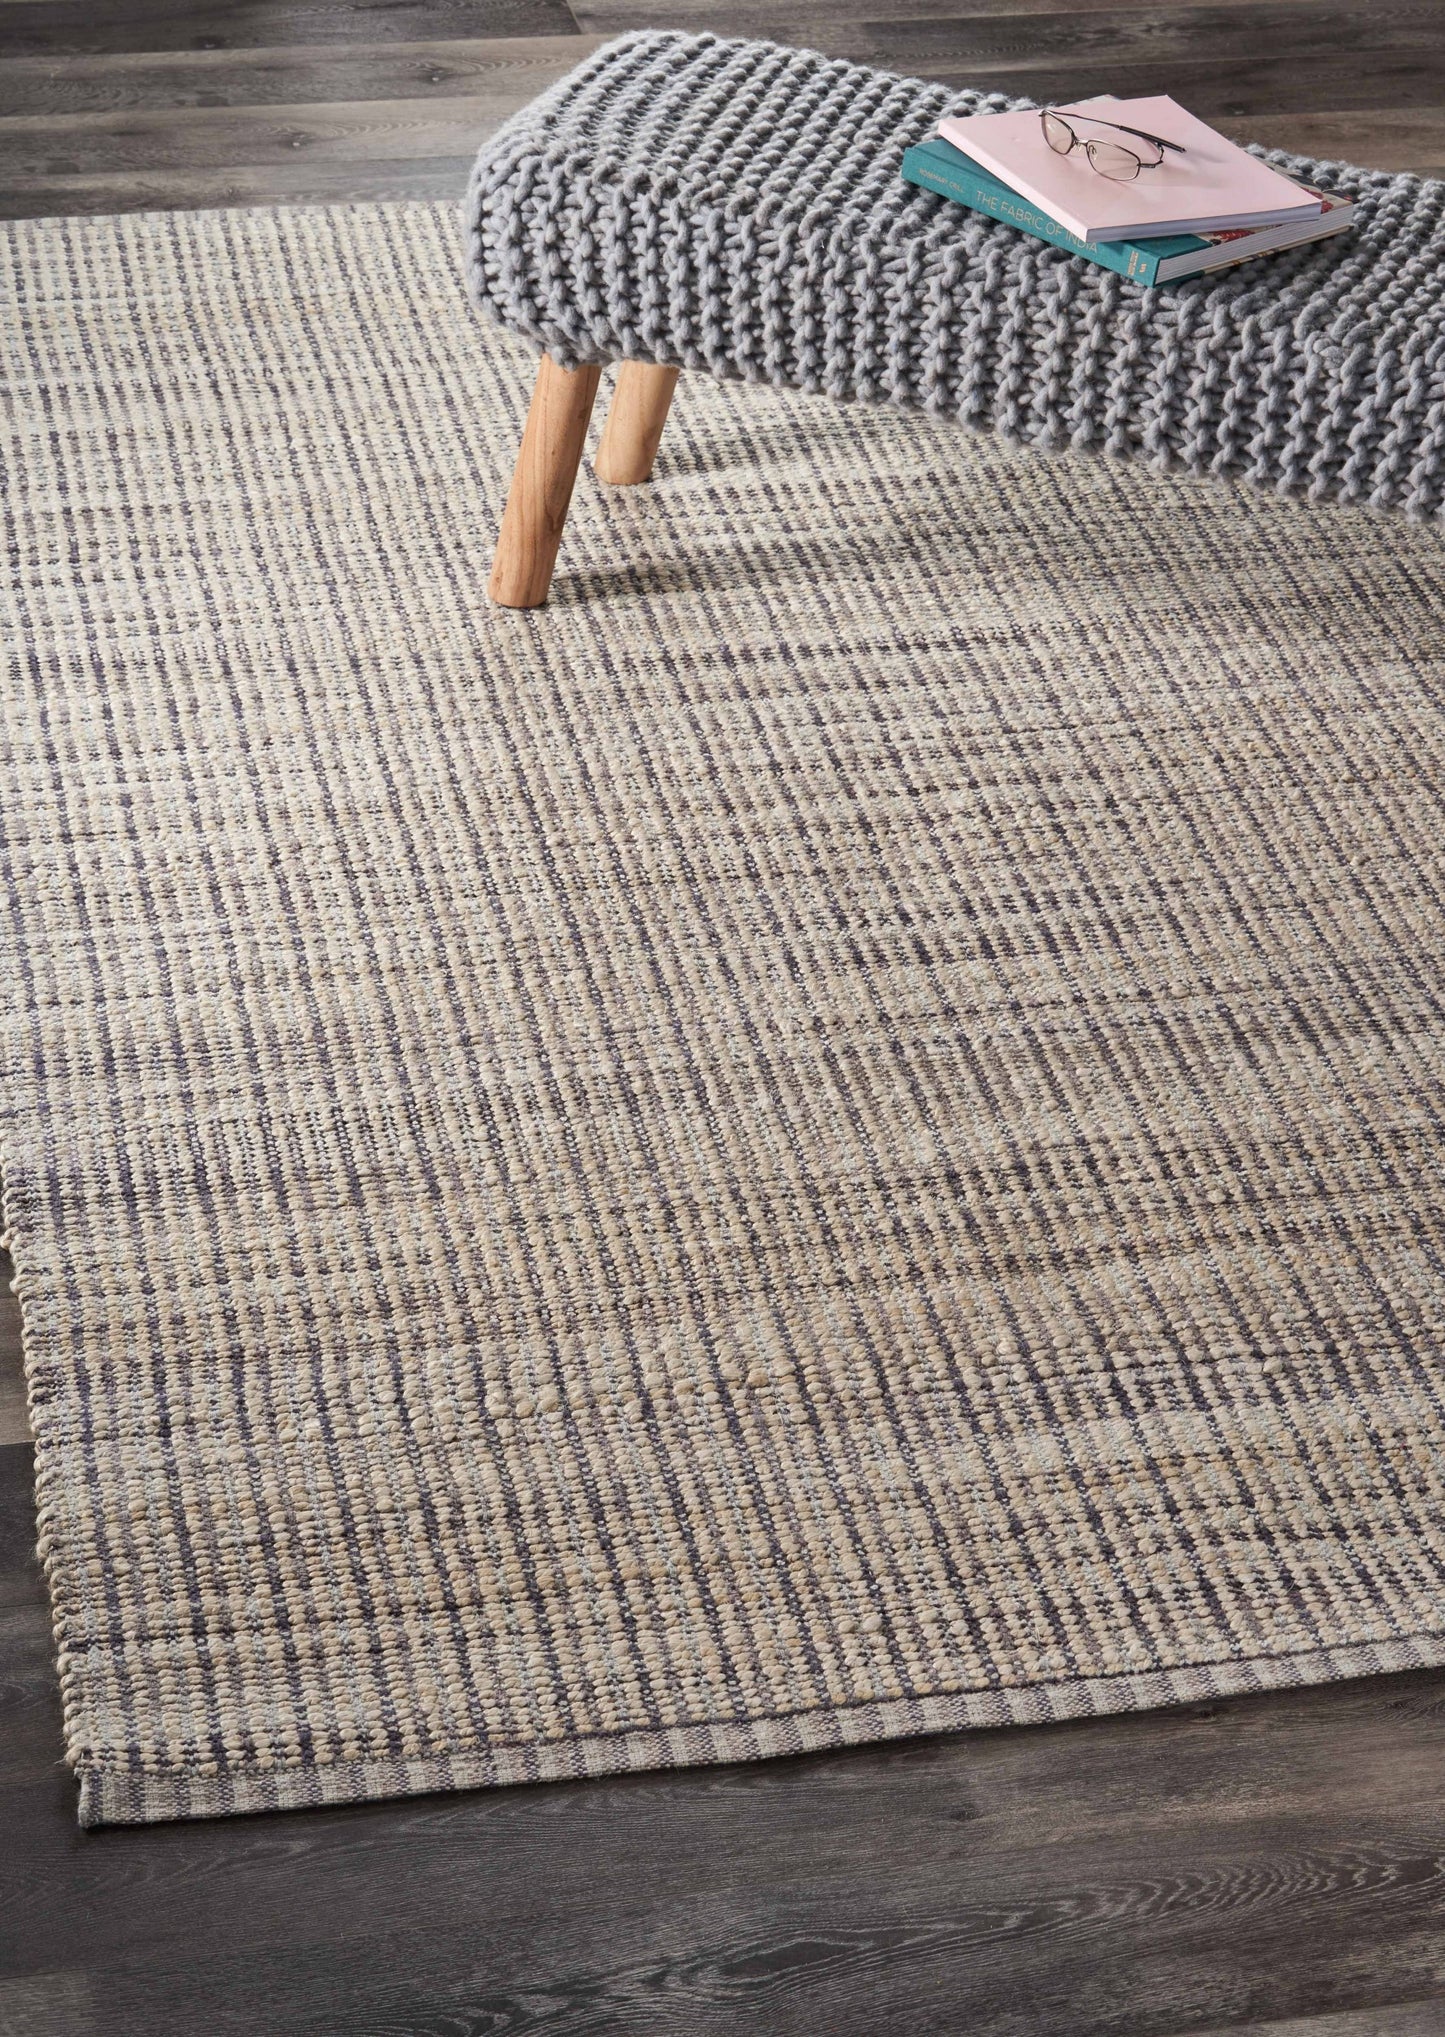 8’ x 10’ Brown and Beige Toned Jute Area Rug